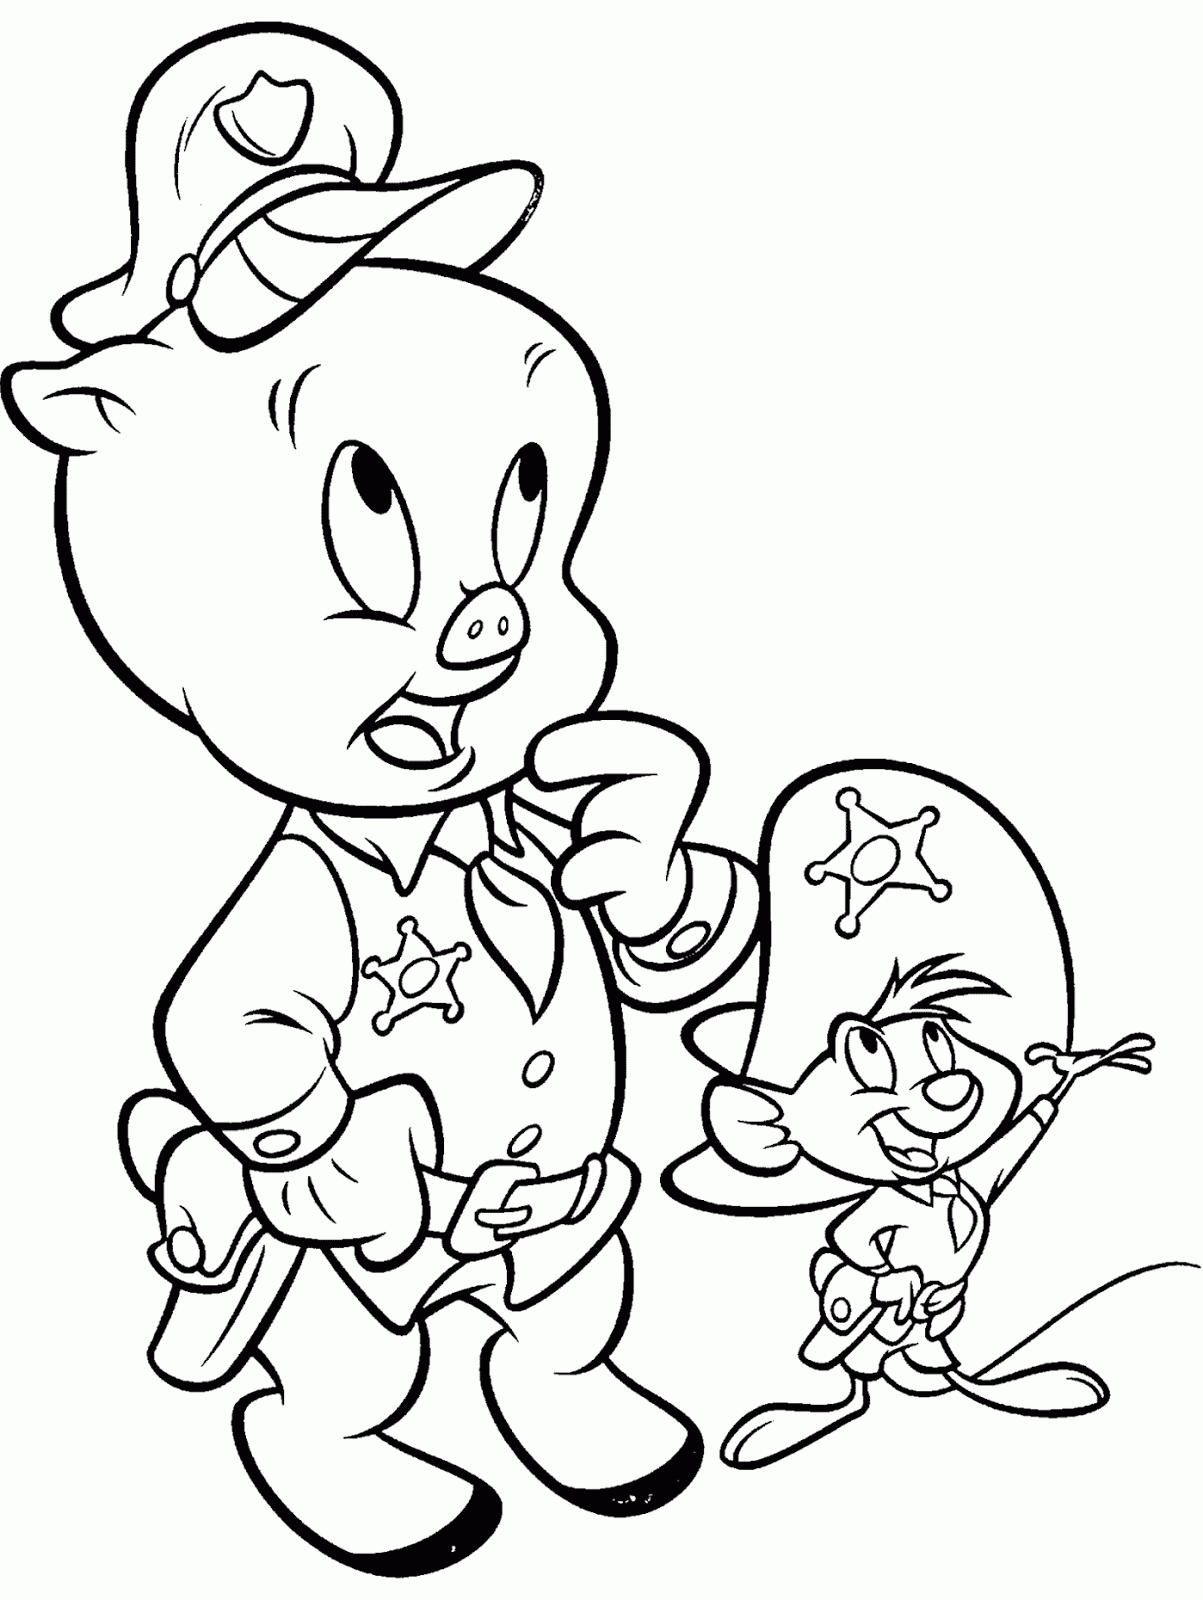 looney tunes coloring pages 1000 images about looney tunes on pinterest looney looney coloring tunes pages 